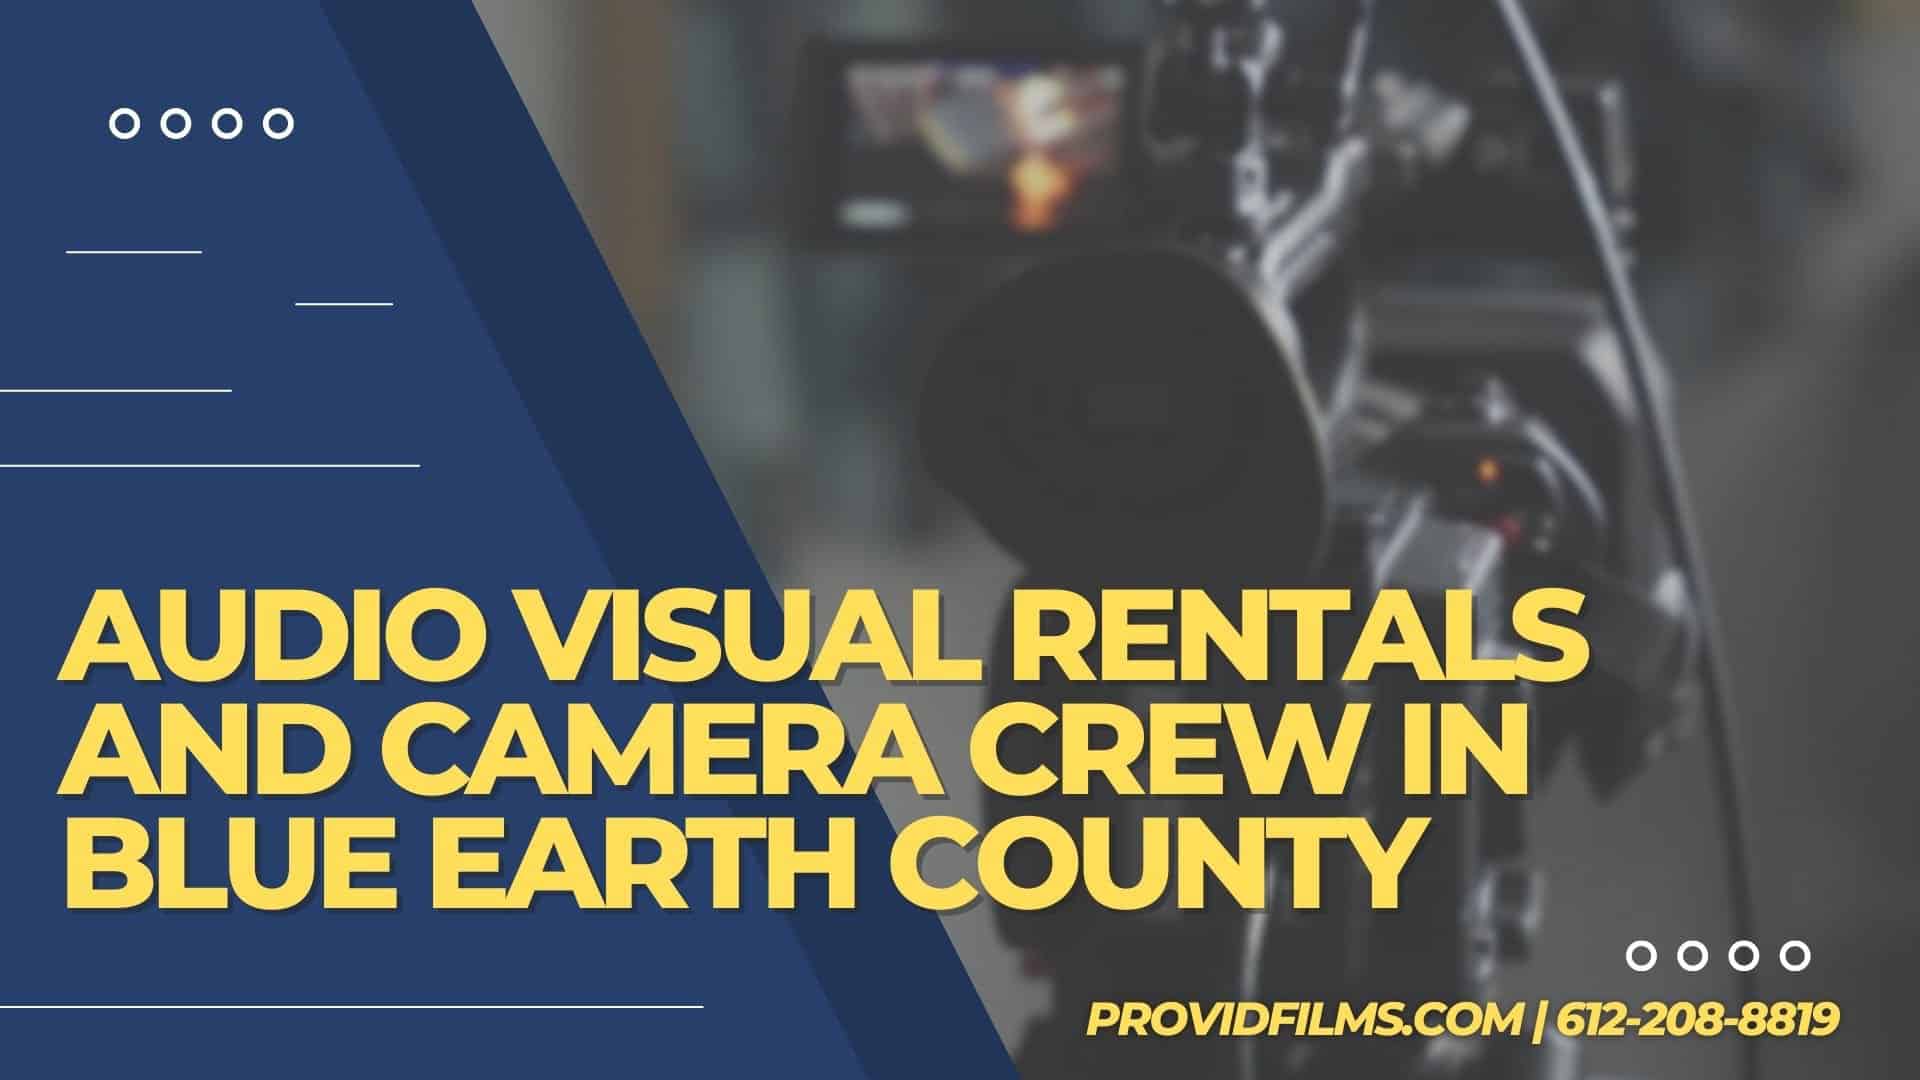 Graphic with a video camera crew with the text saying "AV Rental and Camera Crew in Blue Earth County"